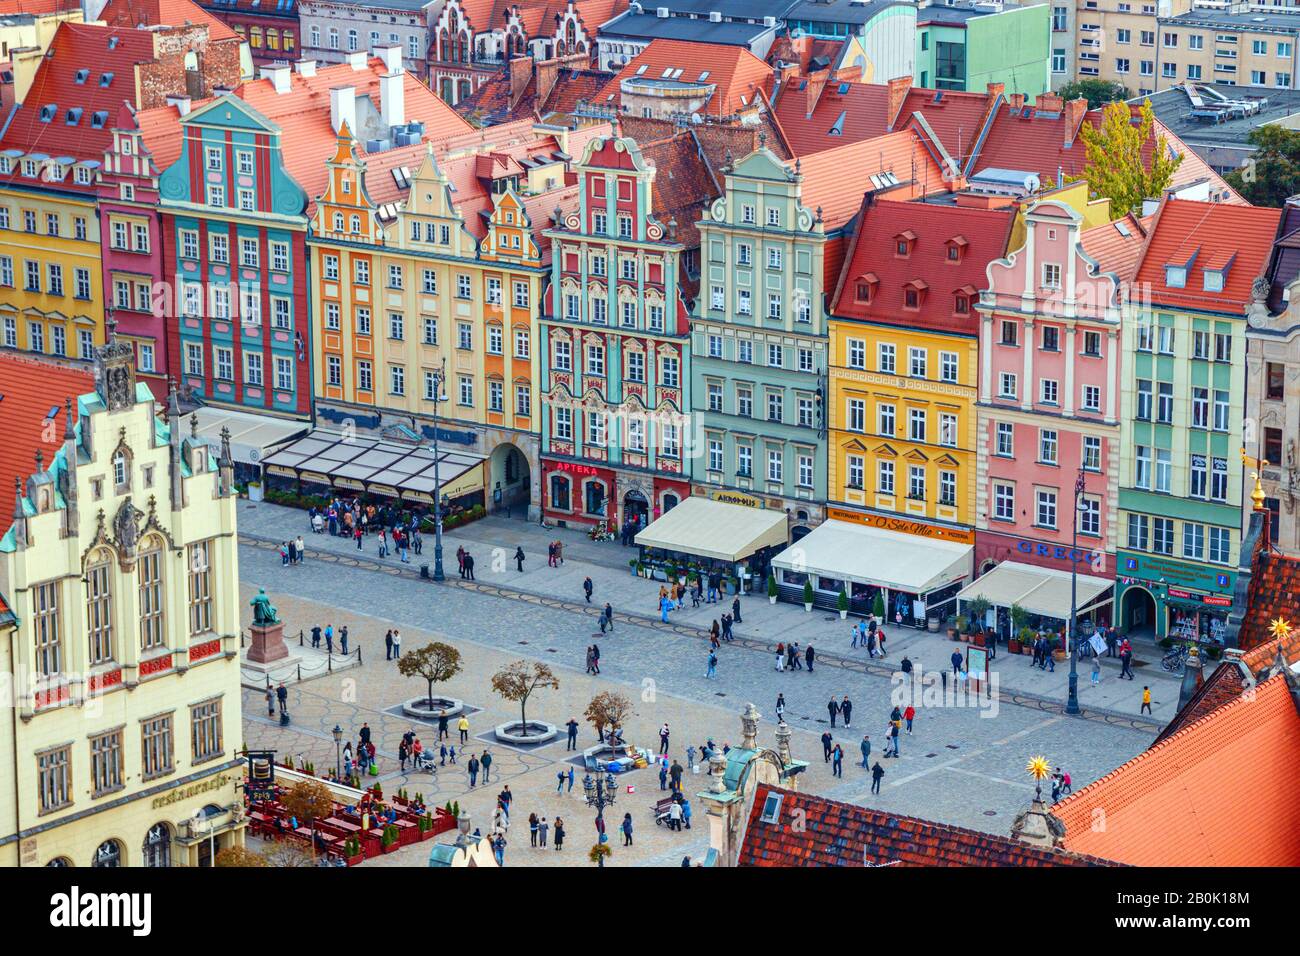 Aerial view of the Wroclaw historical city centre with the colorful houses of the Market Square. Market Square, Wroclaw, Poland. Stock Photo